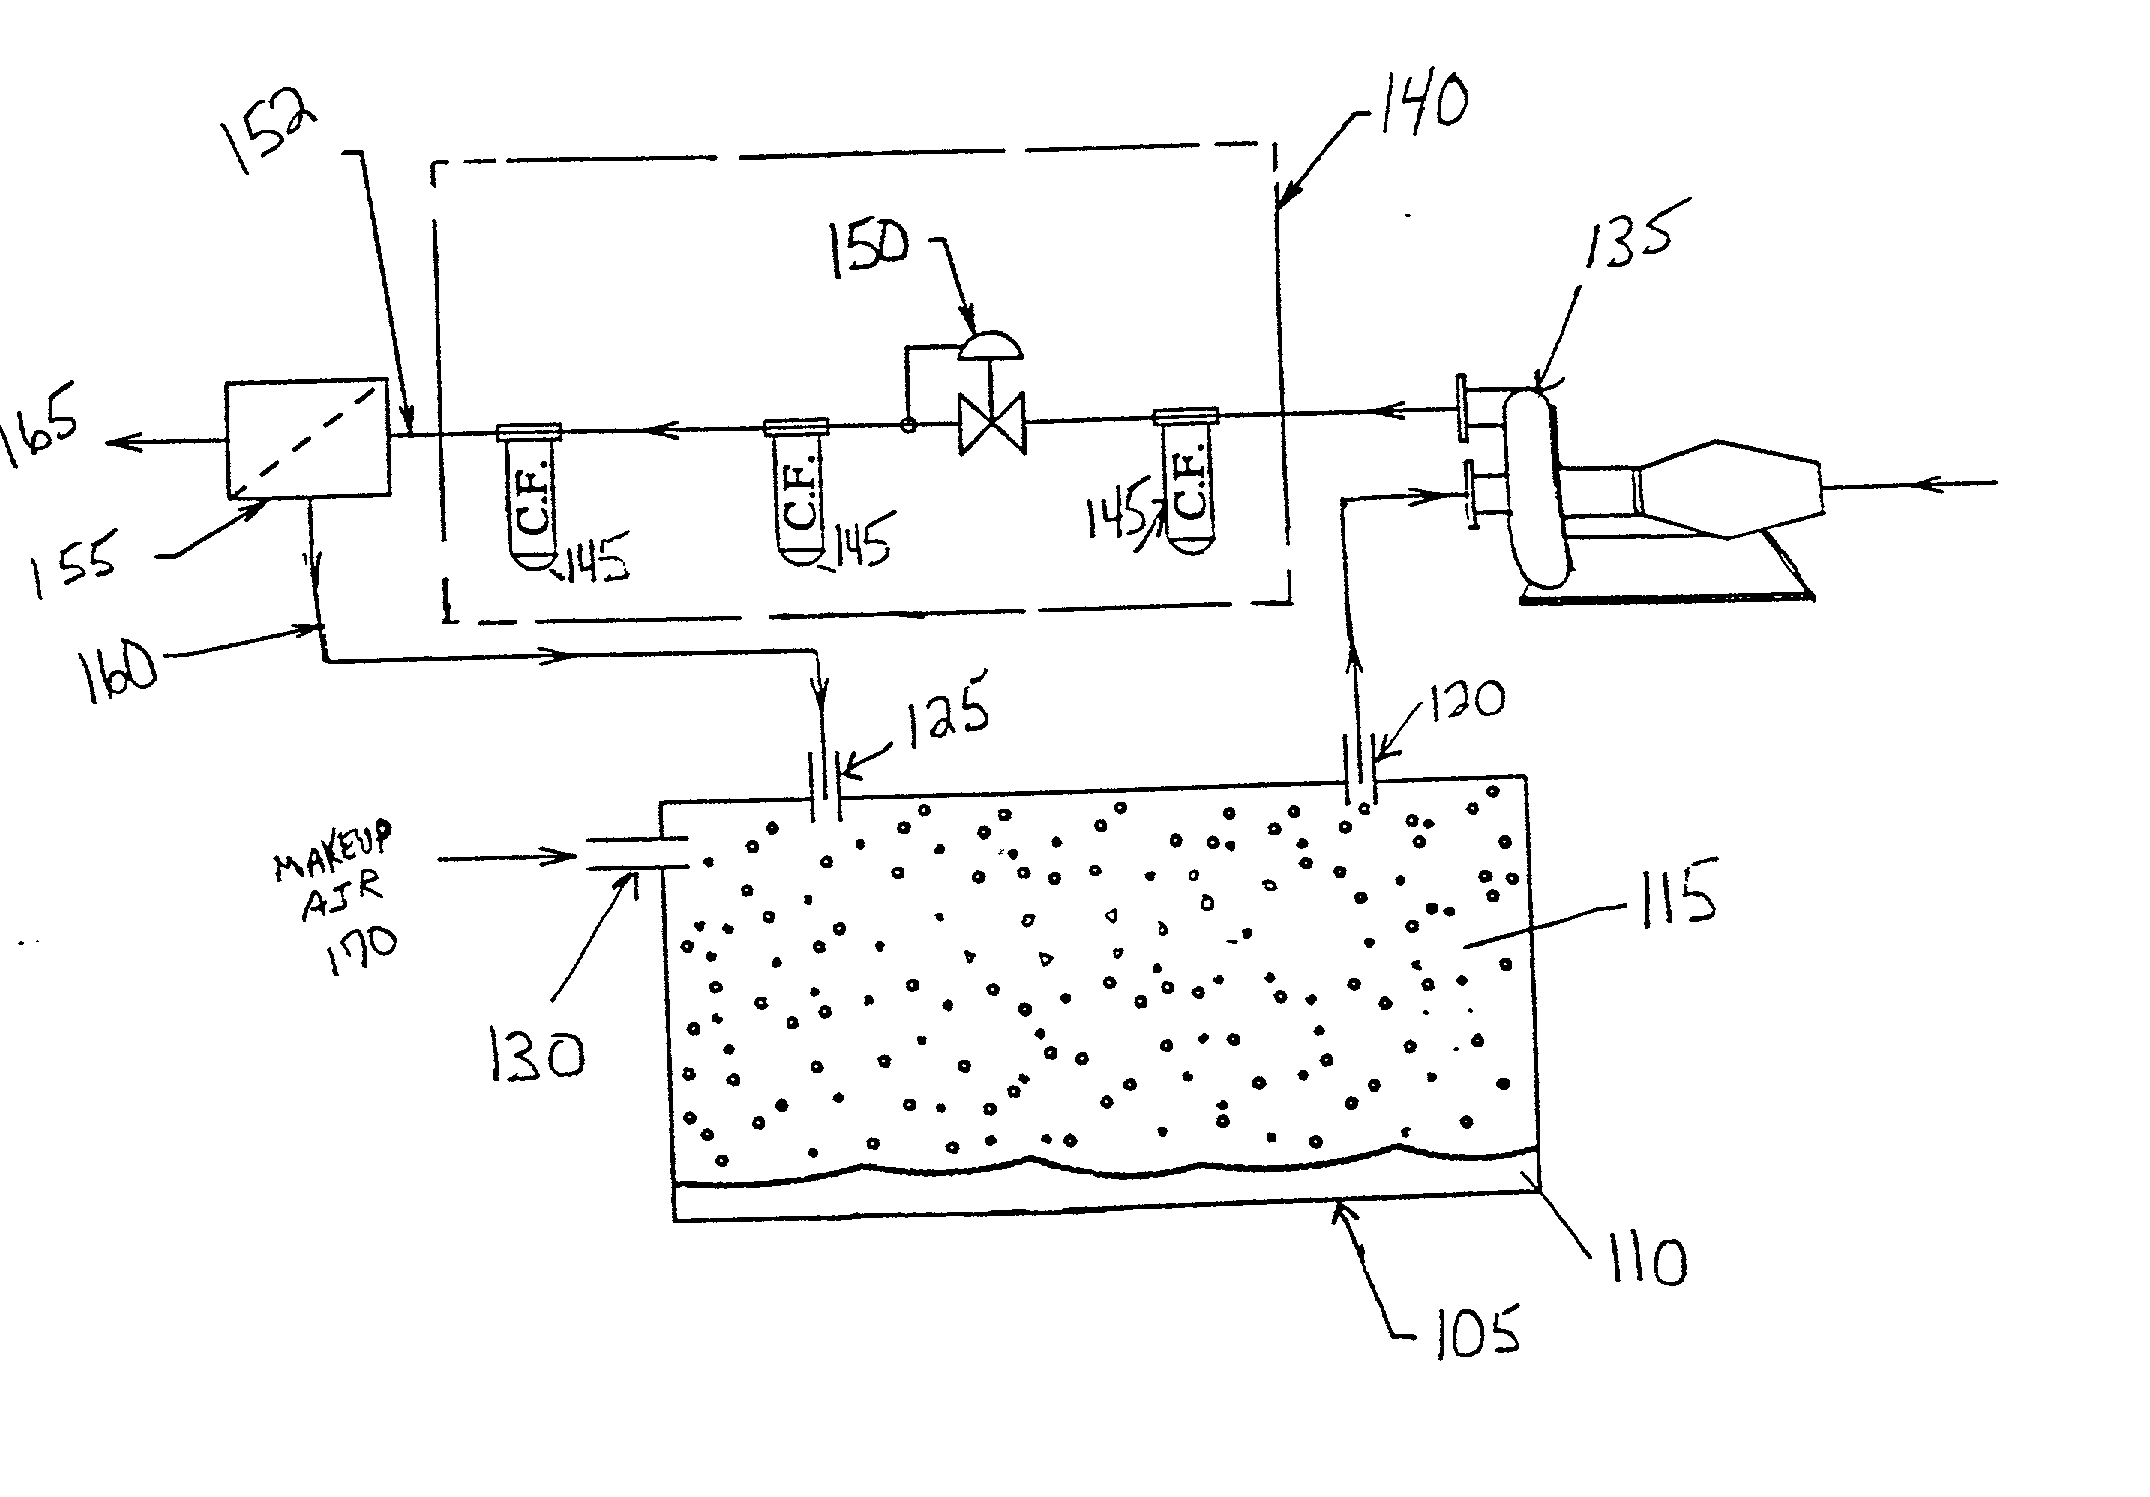 Vented compartment inerting system